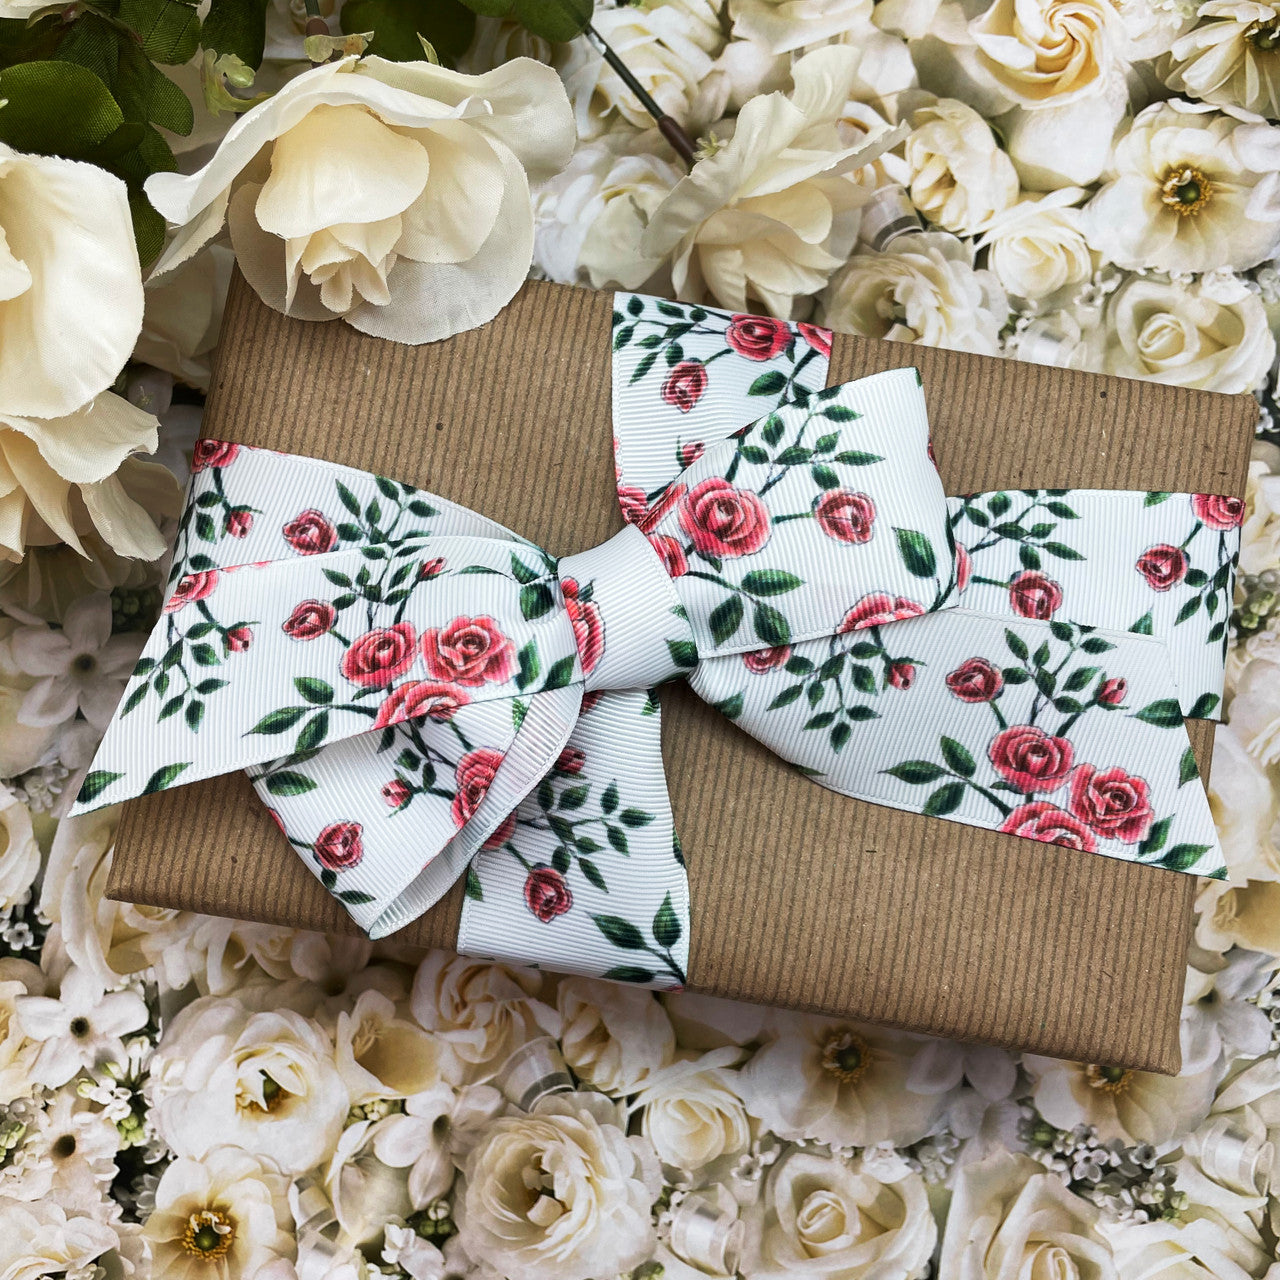 This beautiful ribbon ties the perfect bow for a Mother's Day or wedding gift!